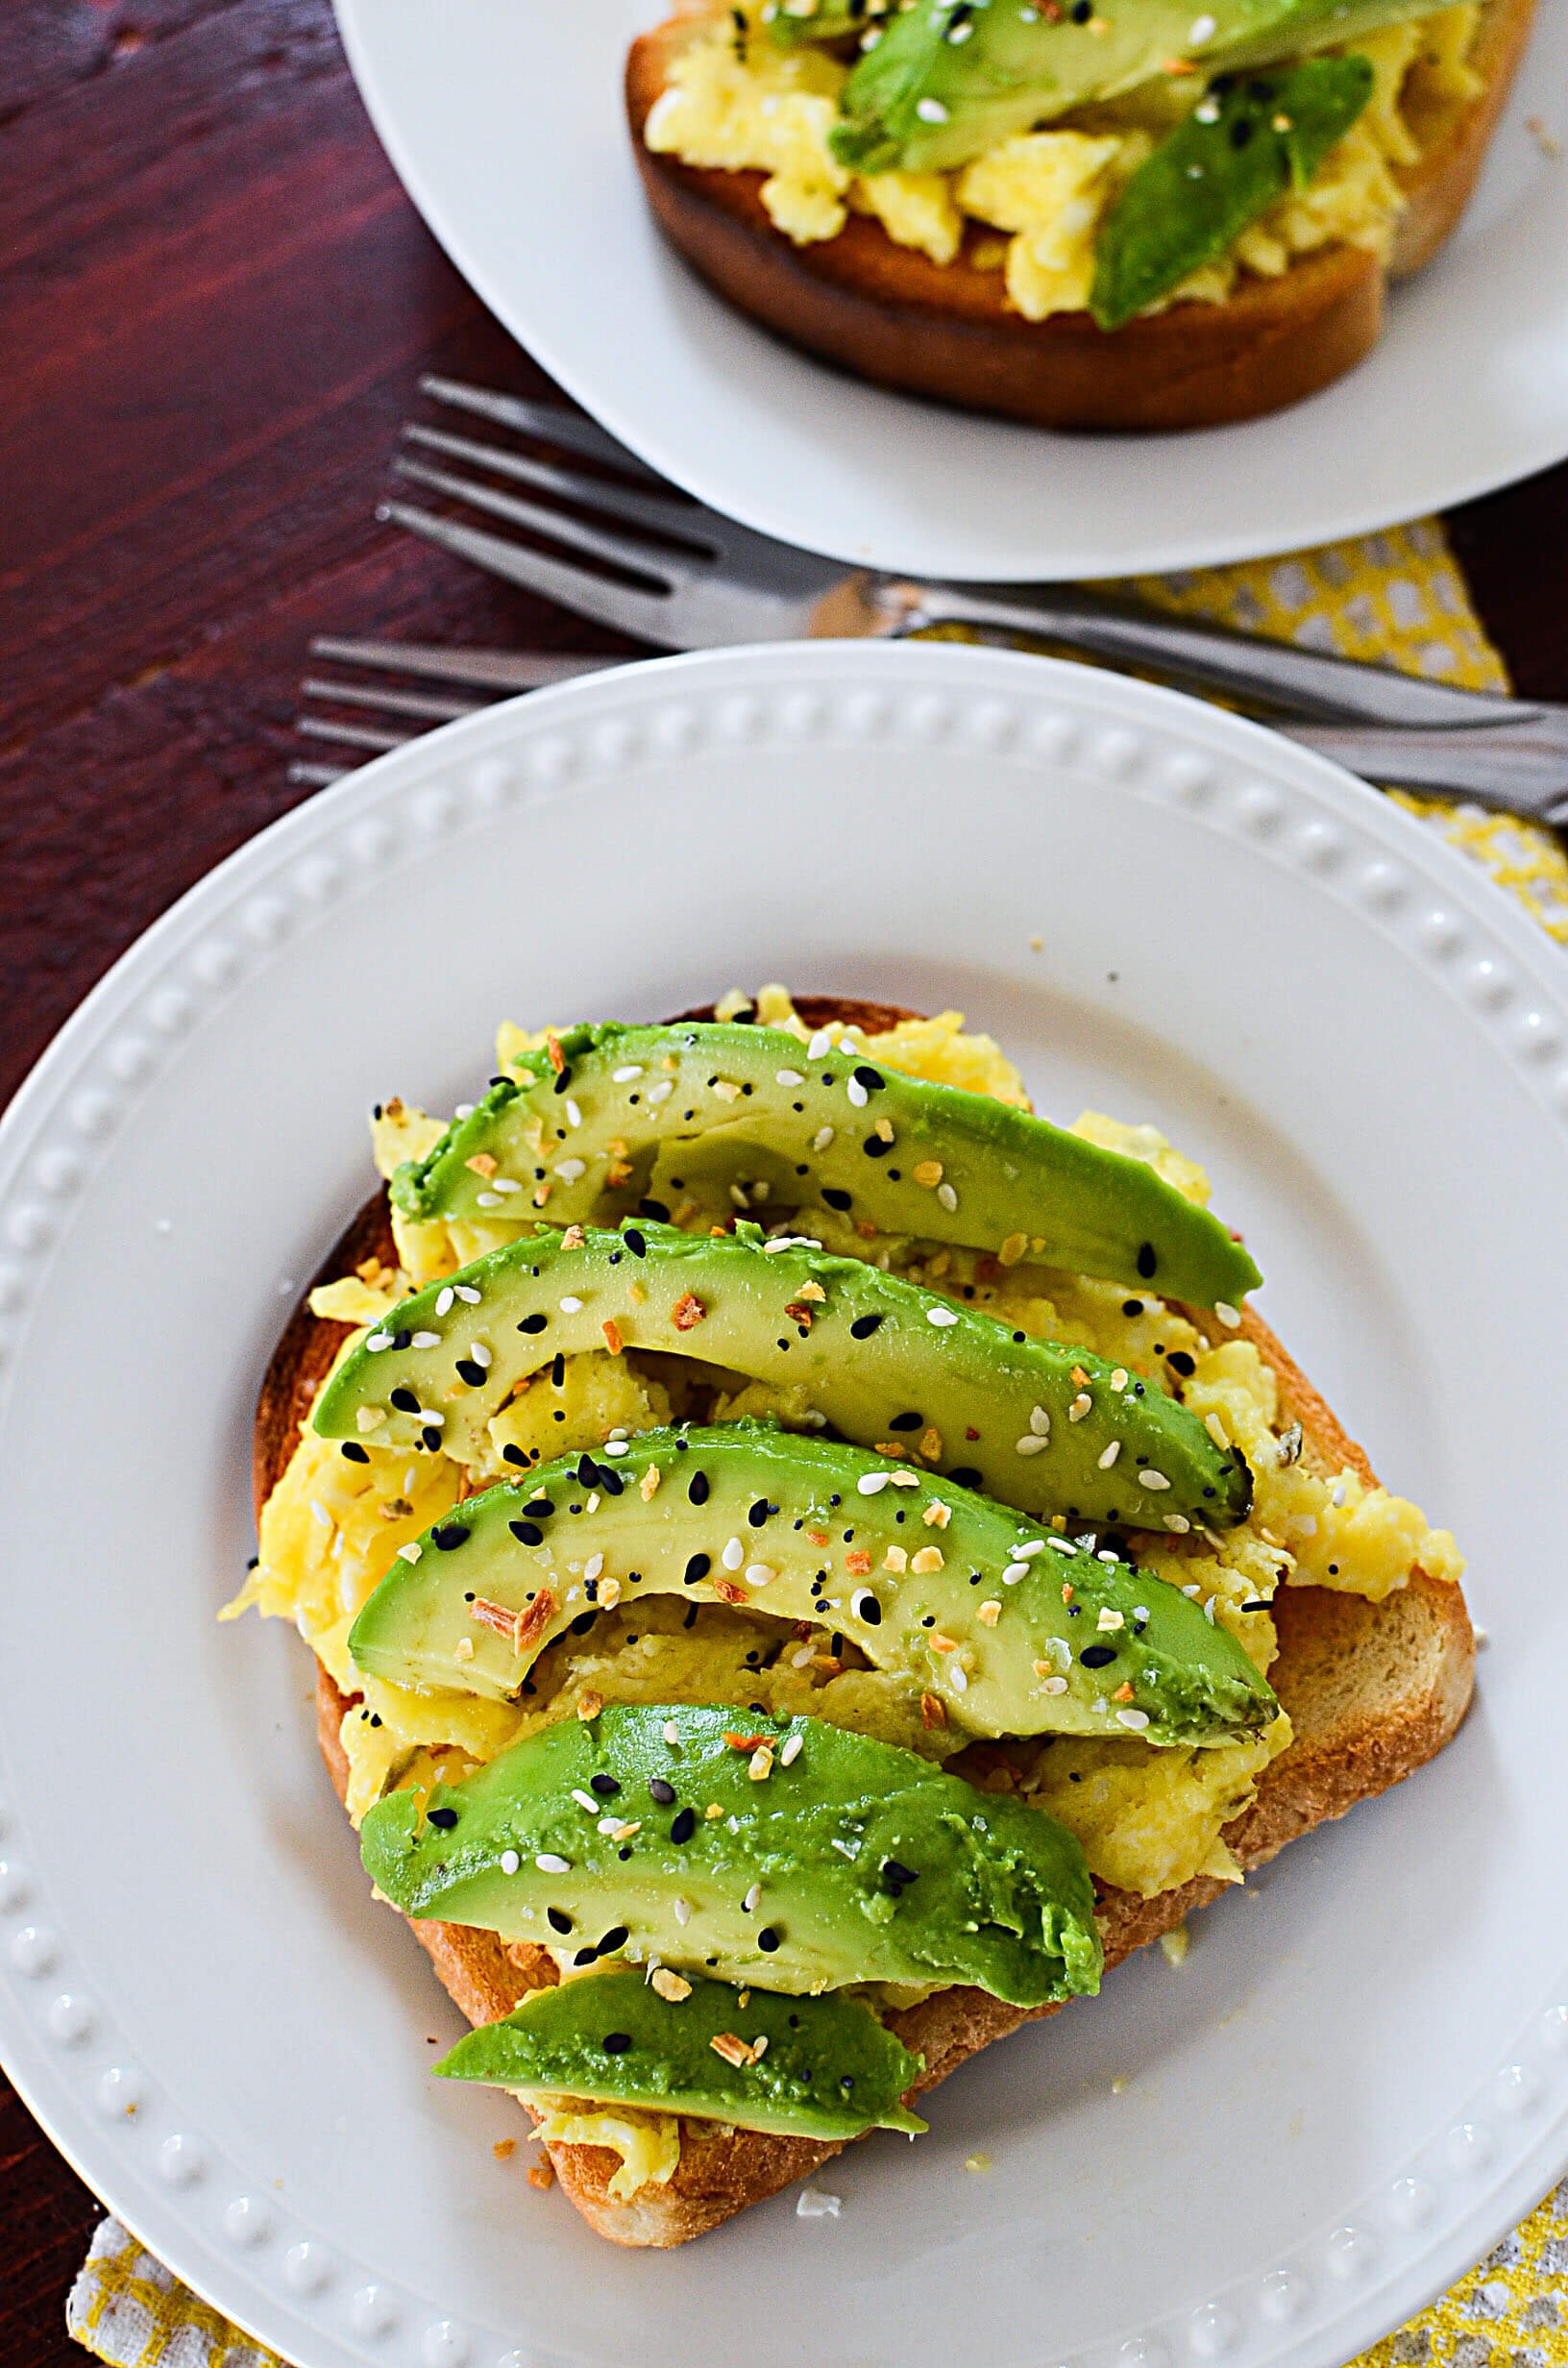 The avocado toast sitting on a white plate with two forks above it. There is another serving of toast above the forks.